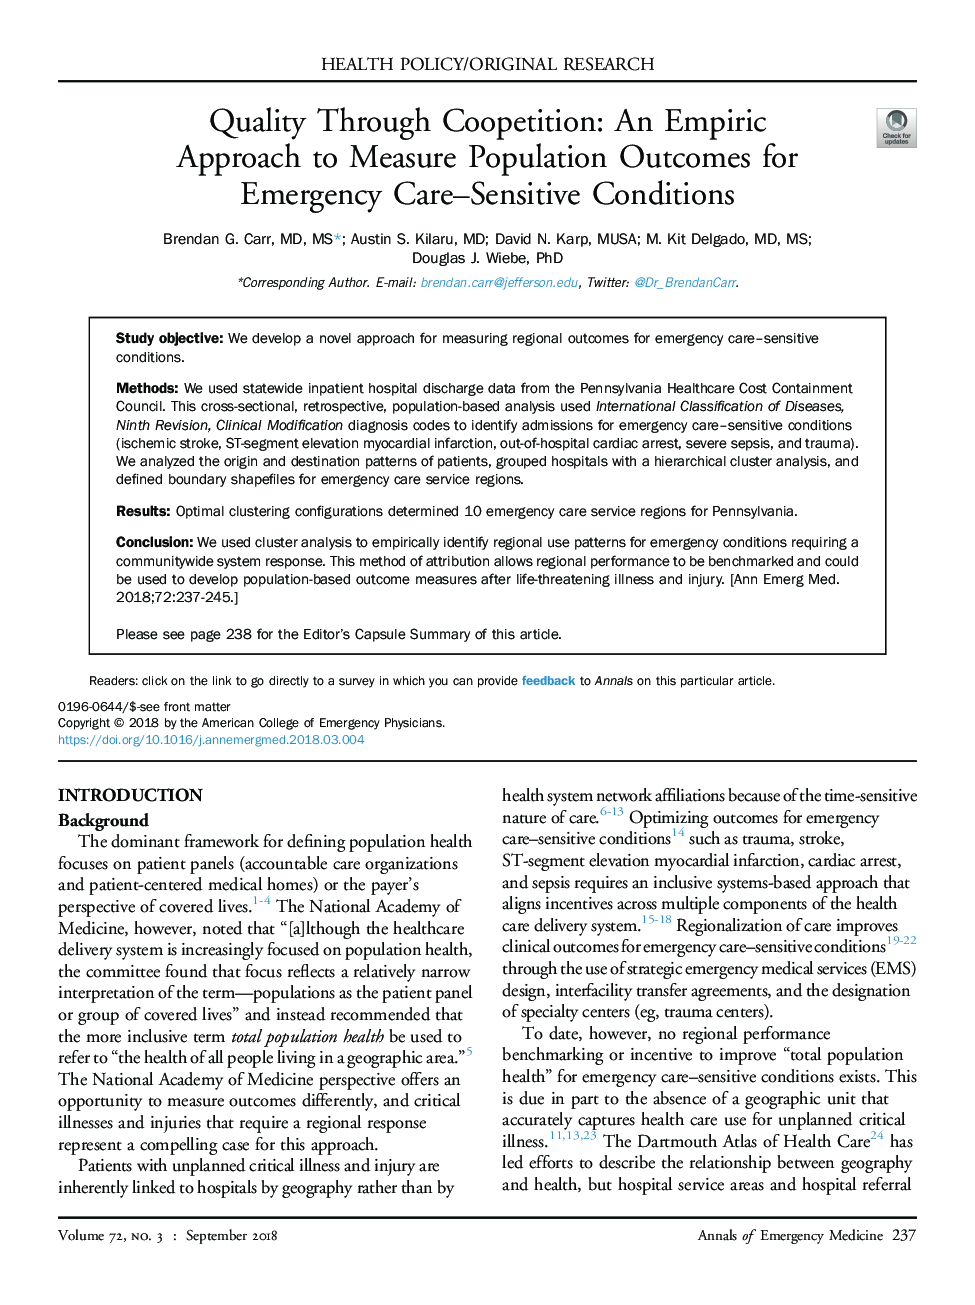 Quality Through Coopetition: An Empiric Approach to Measure Population Outcomes for Emergency Care-Sensitive Conditions